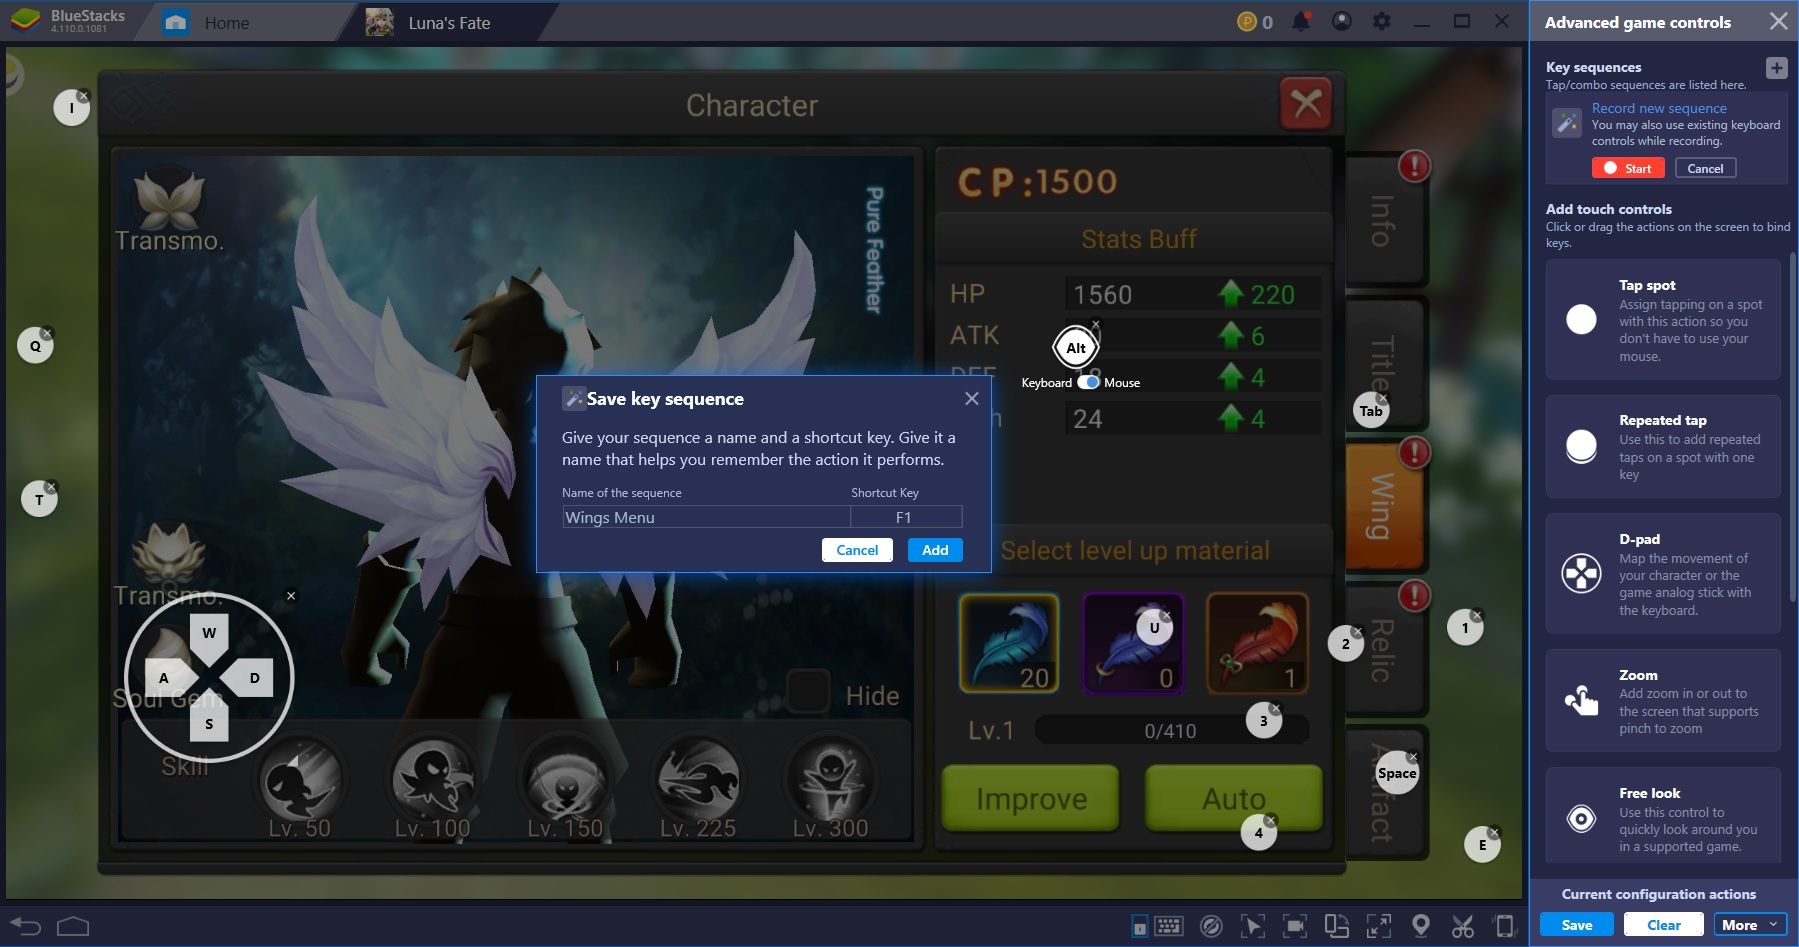 How to Play Luna’s Fate on BlueStacks